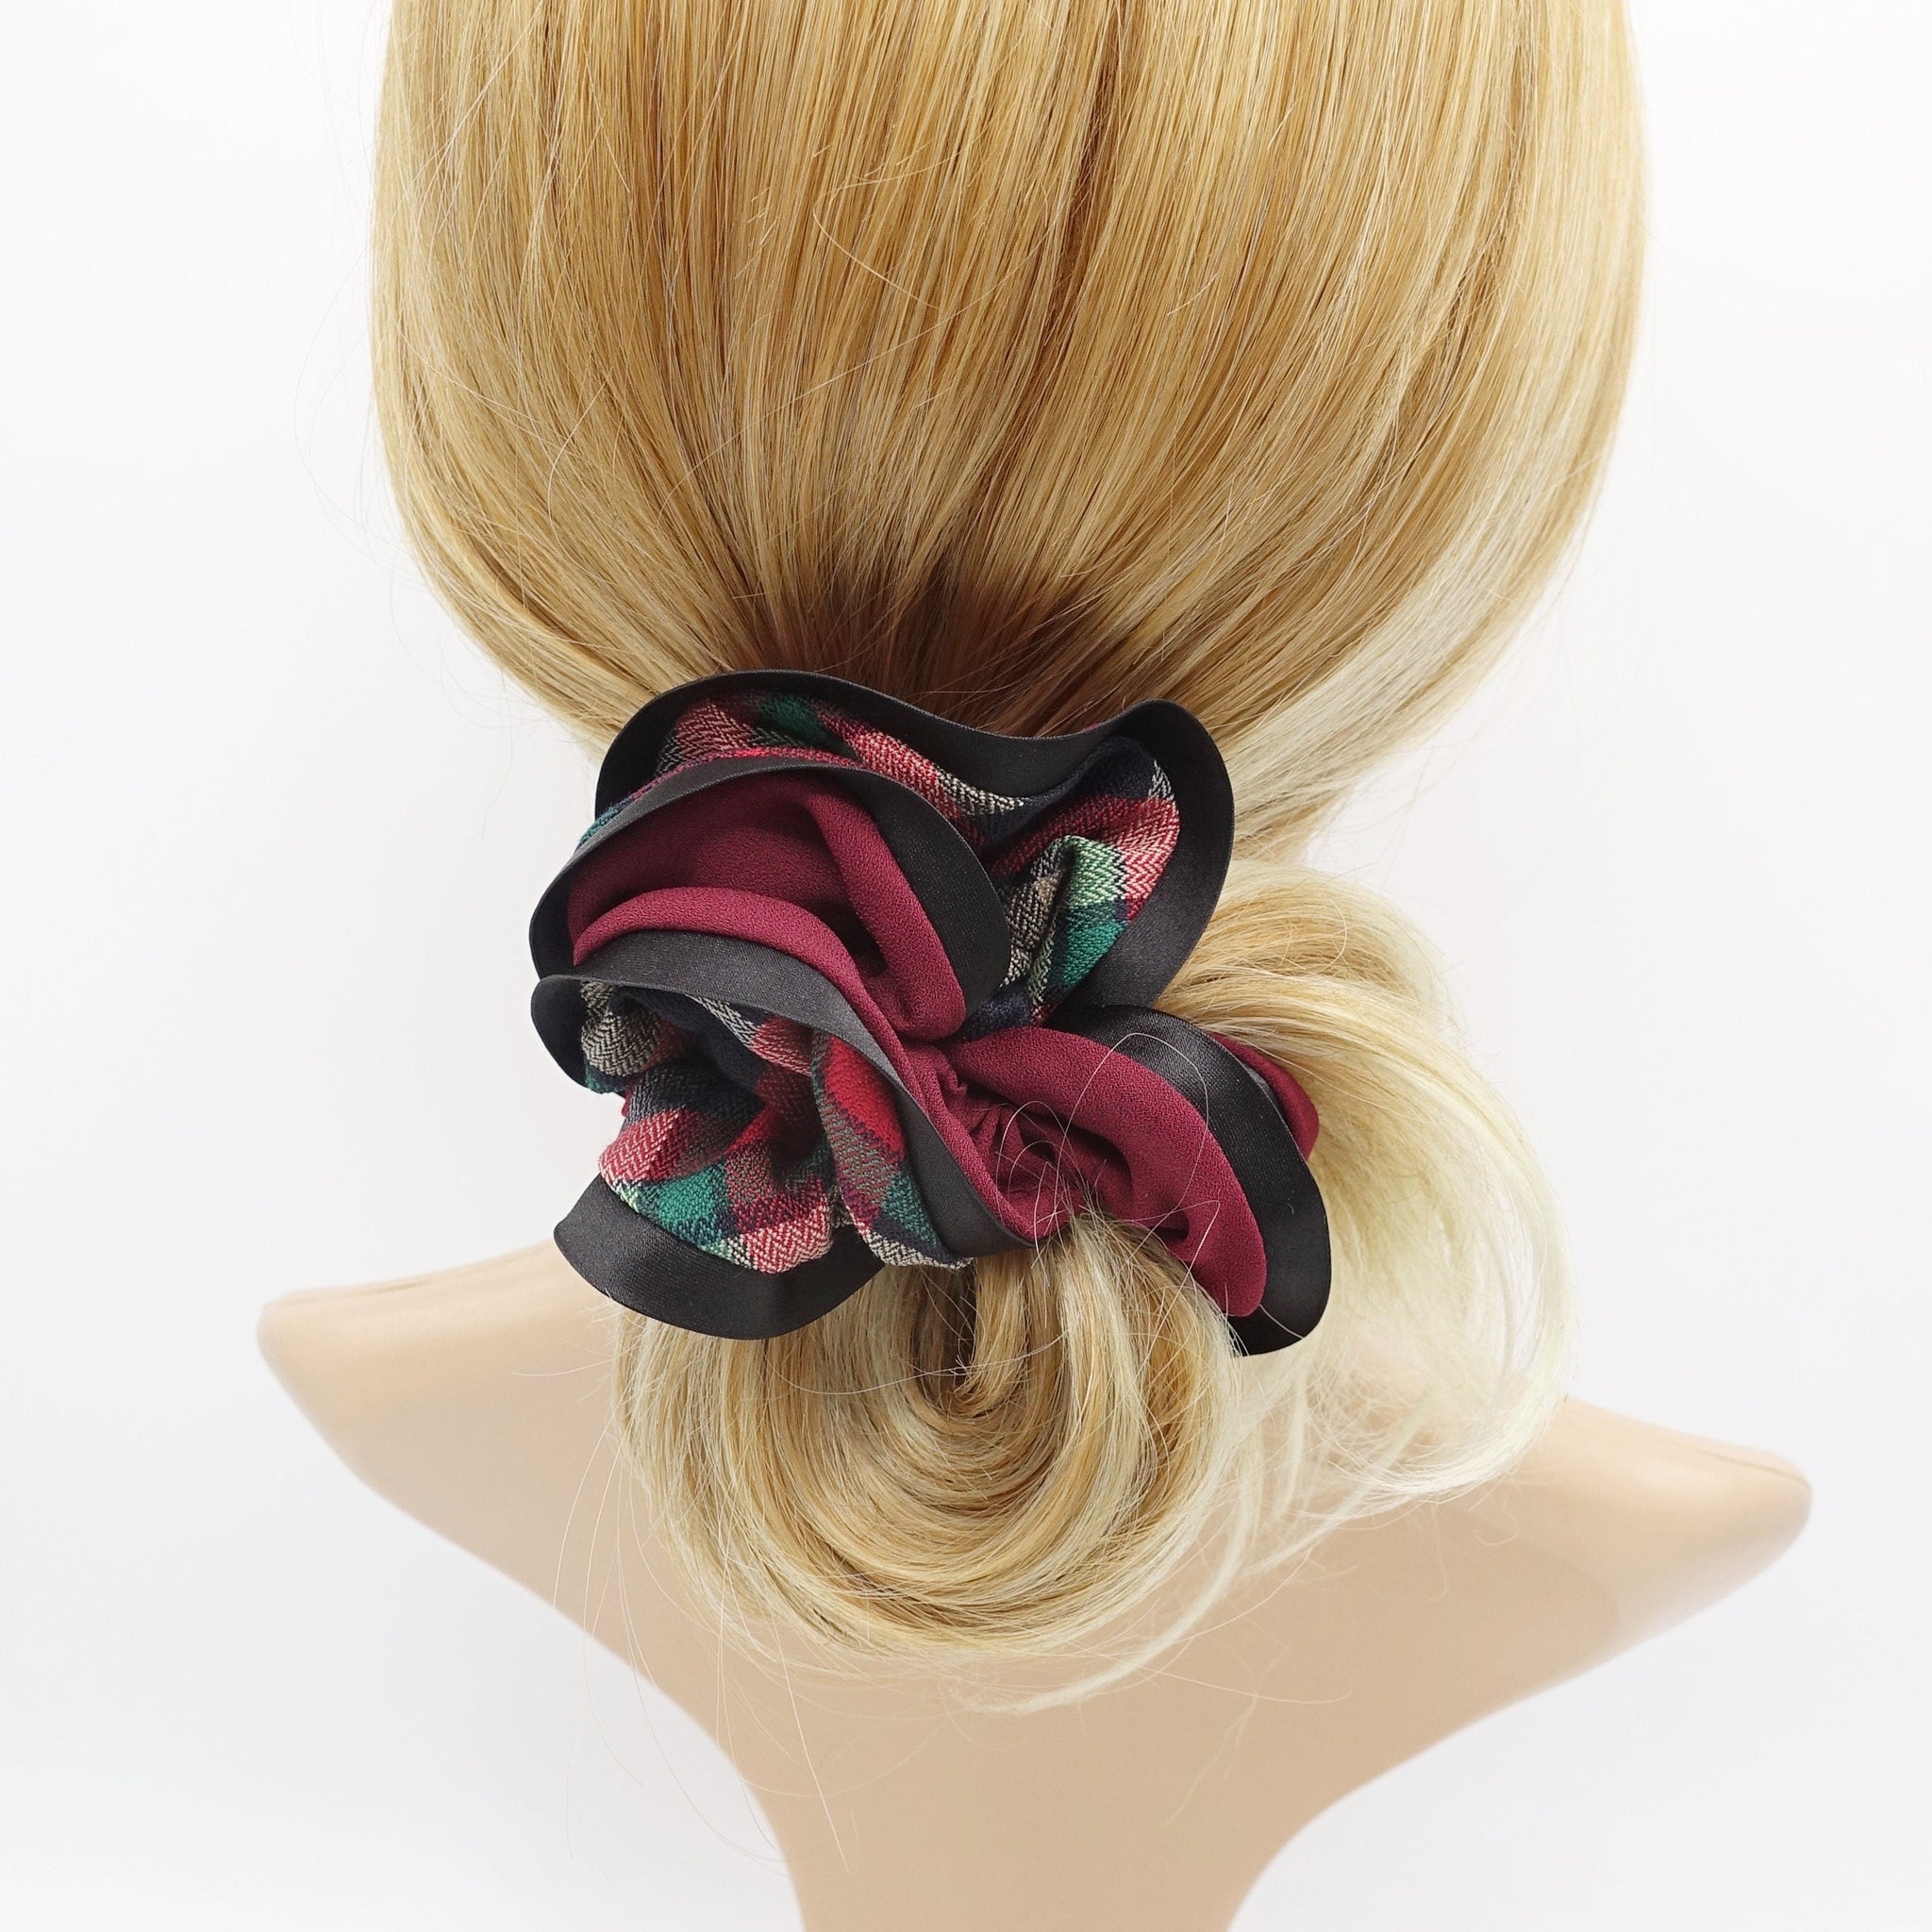 veryshine.com Scrunchies Red wine check scrunchies, 2color tone scrunchies, hair ties for women